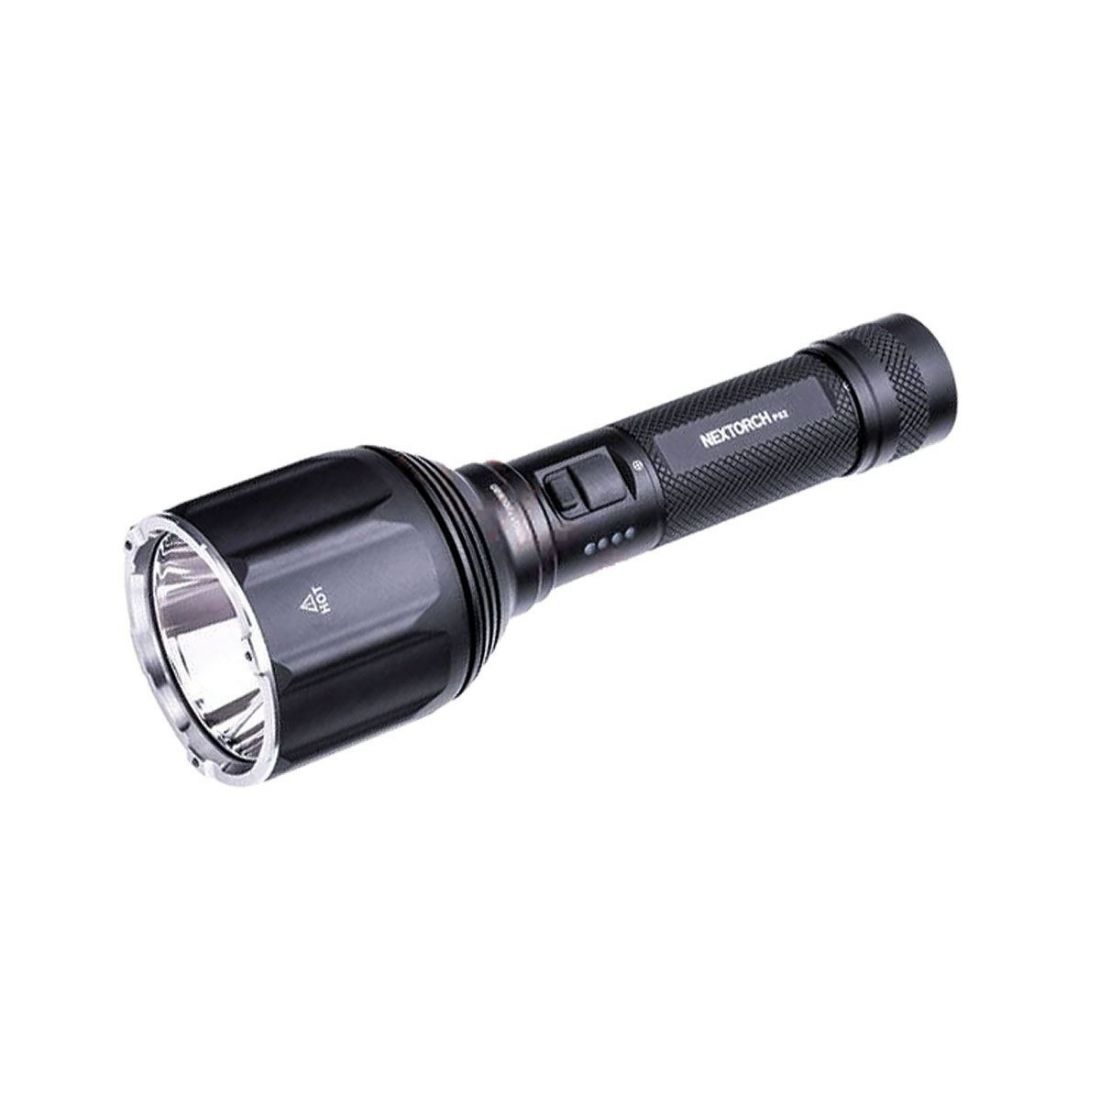 Nextorch Torch P82 (1100m) 1200 Lumens LED Powerful Rechargeable Flashlight-